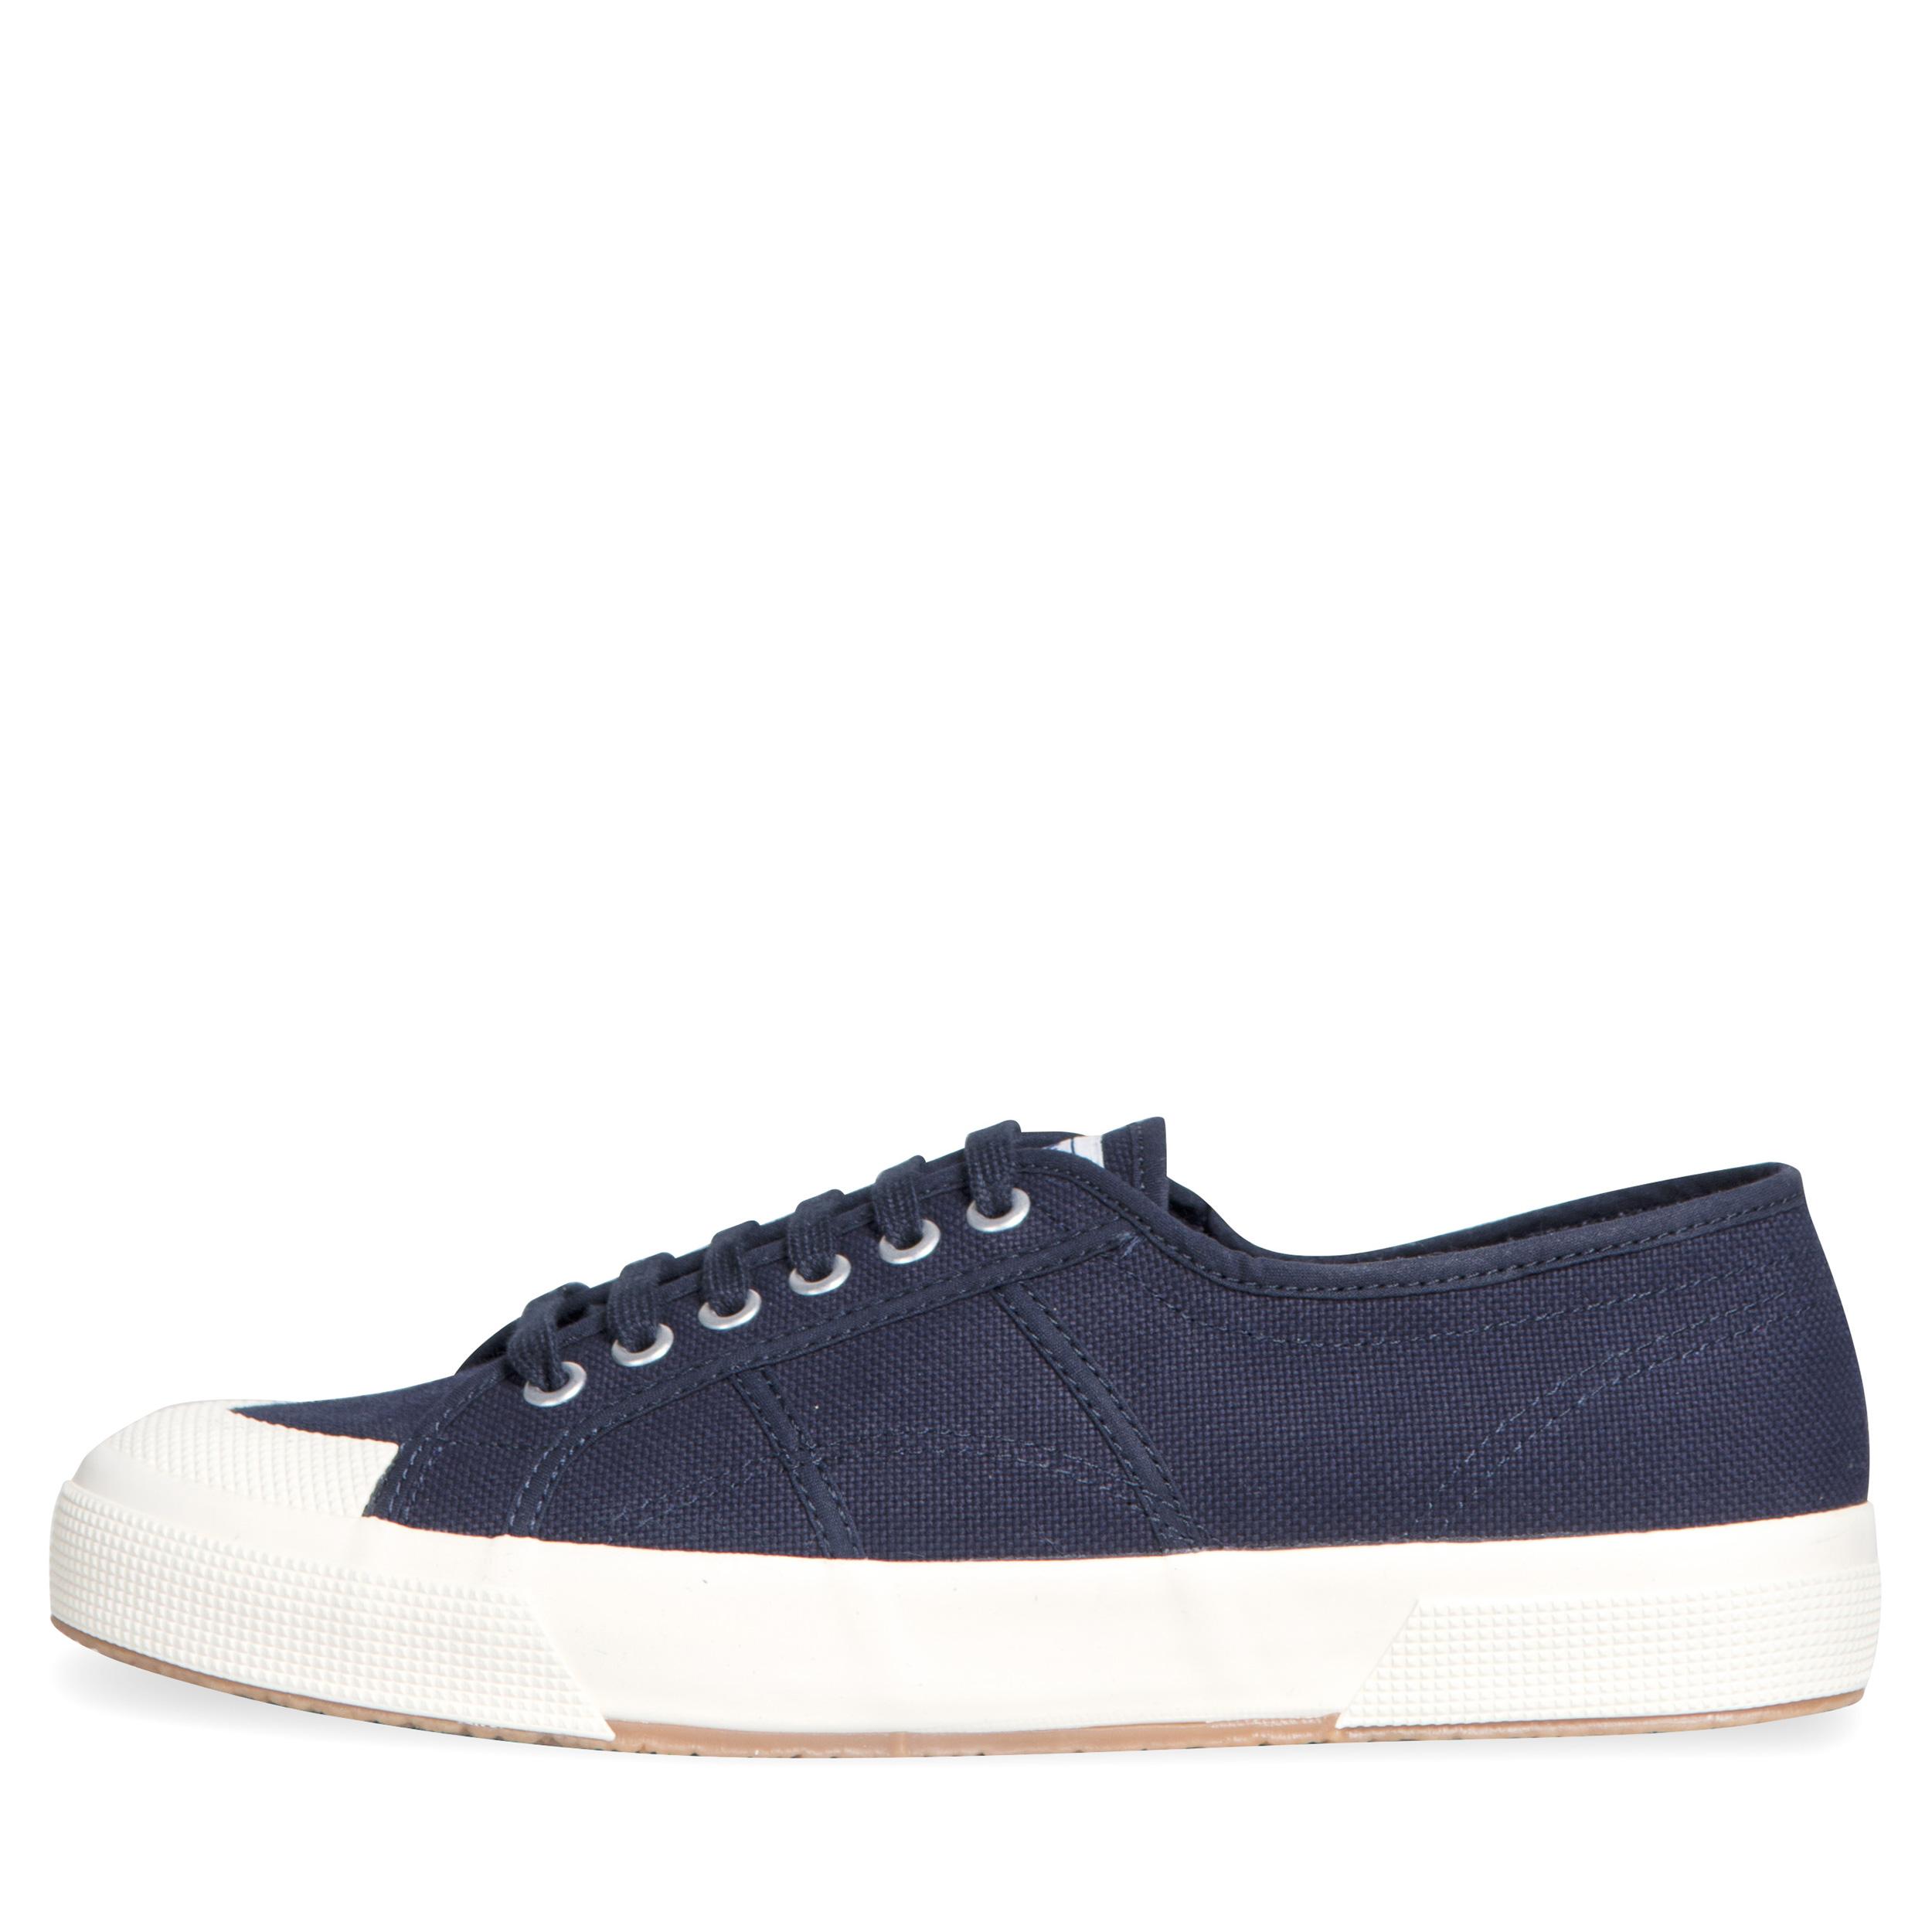 Superga Cotton '2390' Cotu Trainers Navy in Blue for Men - Lyst